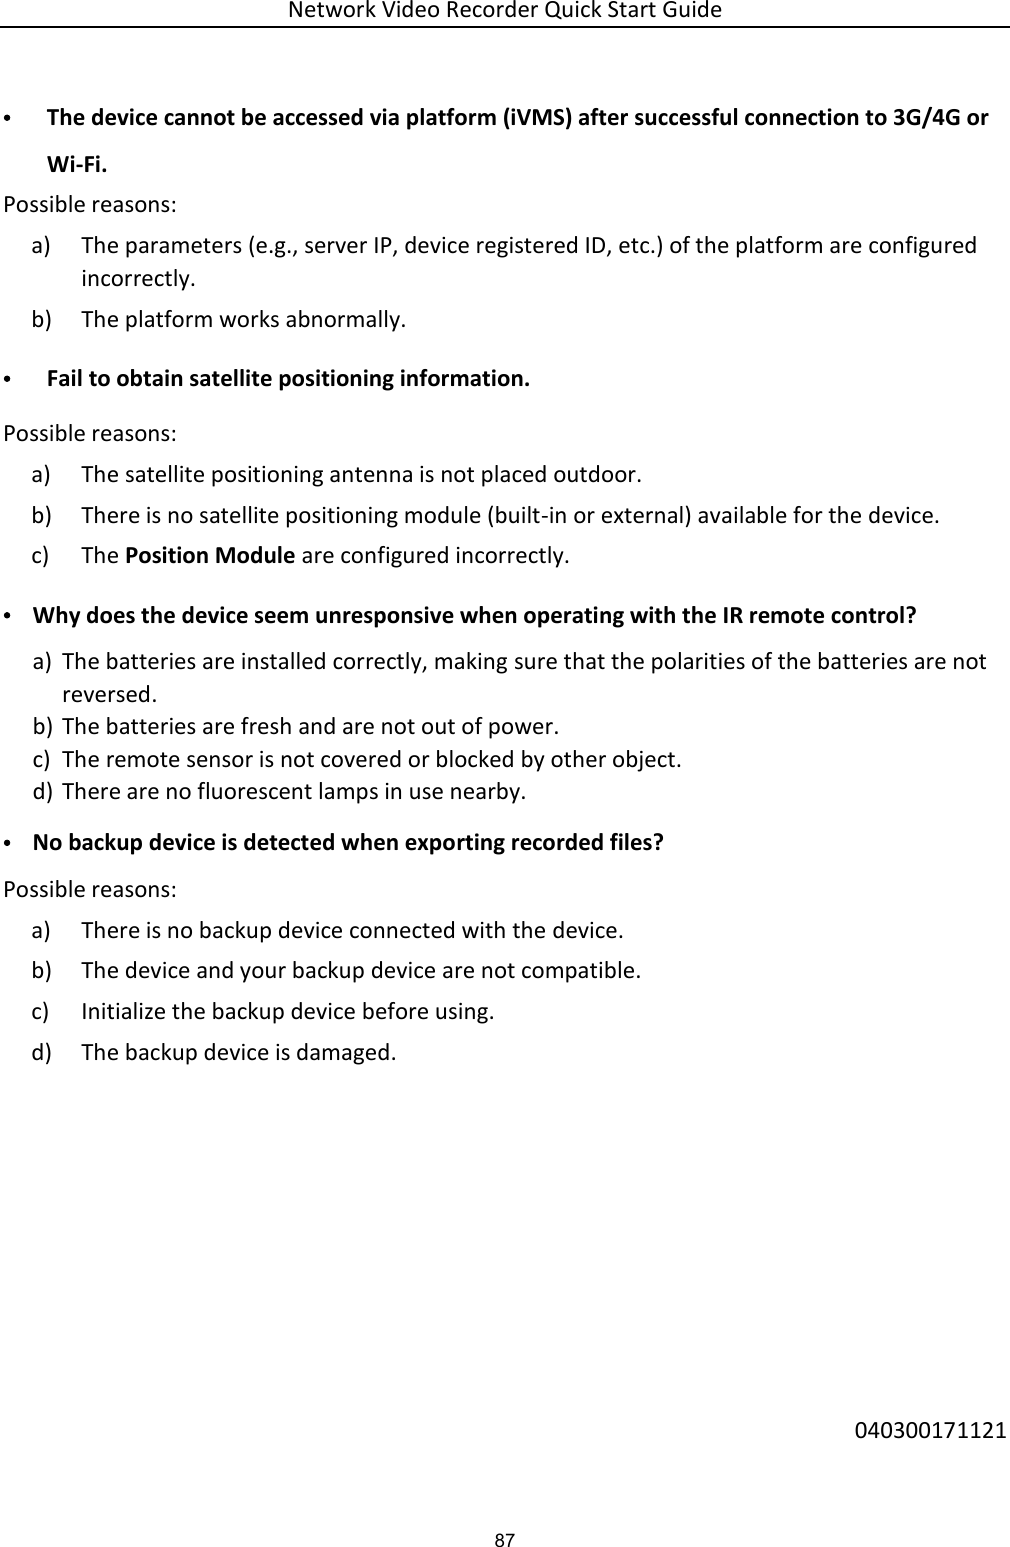 Network Video Recorder Quick Start Guide 87 • The device cannot be accessed via platform (iVMS) after successful connection to 3G/4G or Wi-Fi.   Possible reasons: a) The parameters (e.g., server IP, device registered ID, etc.) of the platform are configured incorrectly. b) The platform works abnormally. • Fail to obtain satellite positioning information. Possible reasons: a) The satellite positioning antenna is not placed outdoor. b) There is no satellite positioning module (built-in or external) available for the device. c) The Position Module are configured incorrectly.   • Why does the device seem unresponsive when operating with the IR remote control? a) The batteries are installed correctly, making sure that the polarities of the batteries are not reversed. b) The batteries are fresh and are not out of power. c) The remote sensor is not covered or blocked by other object. d) There are no fluorescent lamps in use nearby. • No backup device is detected when exporting recorded files? Possible reasons:   a) There is no backup device connected with the device. b) The device and your backup device are not compatible.   c) Initialize the backup device before using. d) The backup device is damaged.        040300171121 